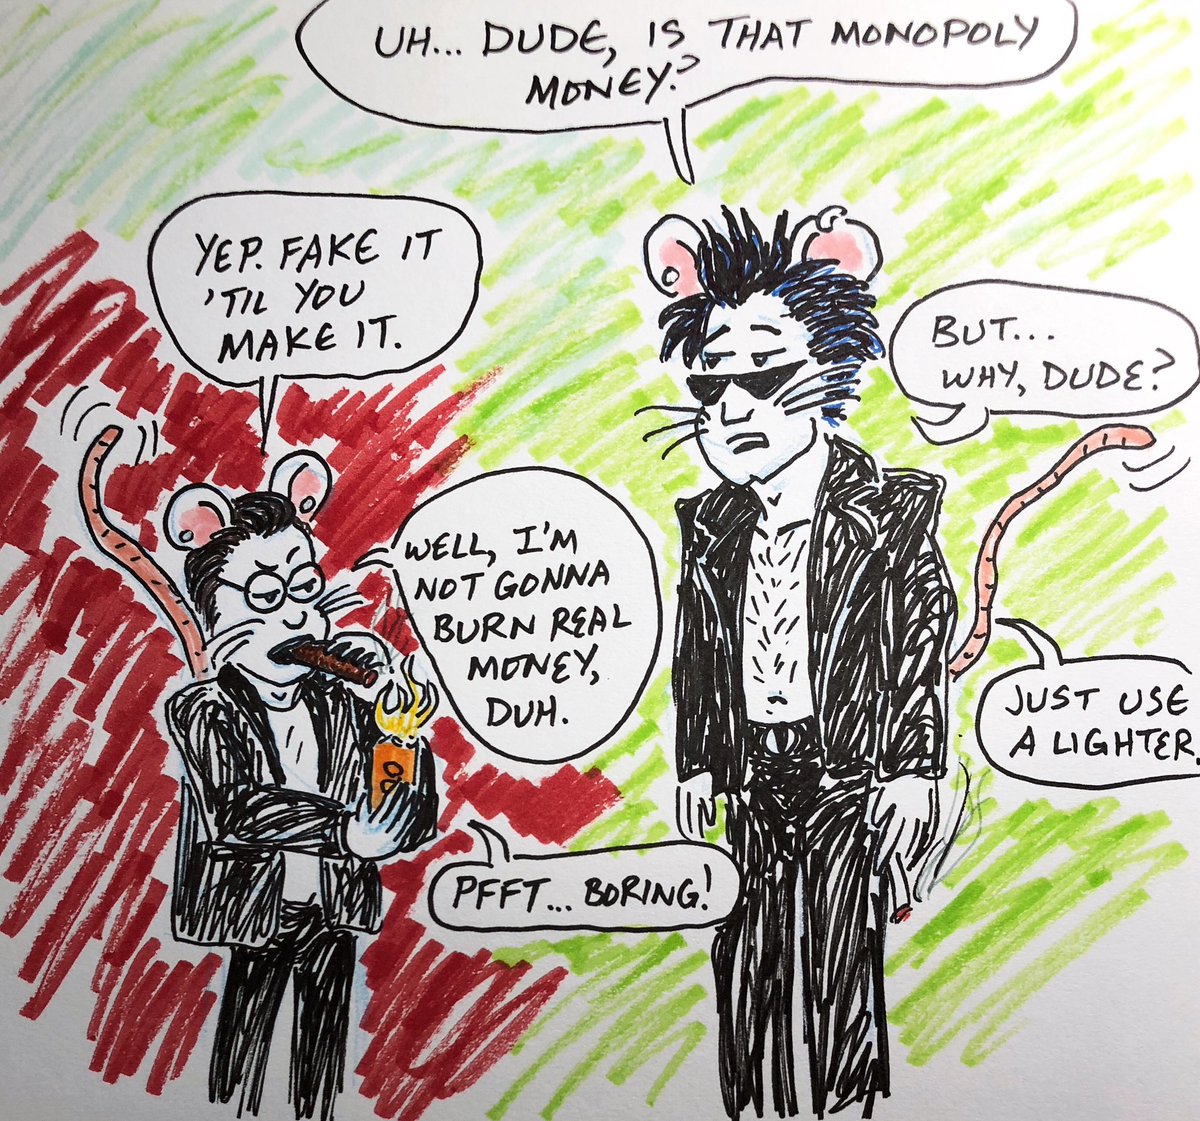 Today’s Ricky B. Rat cartoon: Myles and Ricky have rather different styles when it comes to lighting up… despite his small size, Myles likes playing Mr. BigTime.

#sketchbook #markerdrawing #mouseman #ratman #punkrock #cartoonsketch #monopolymoney #fakeittillyoumakeit #cigars